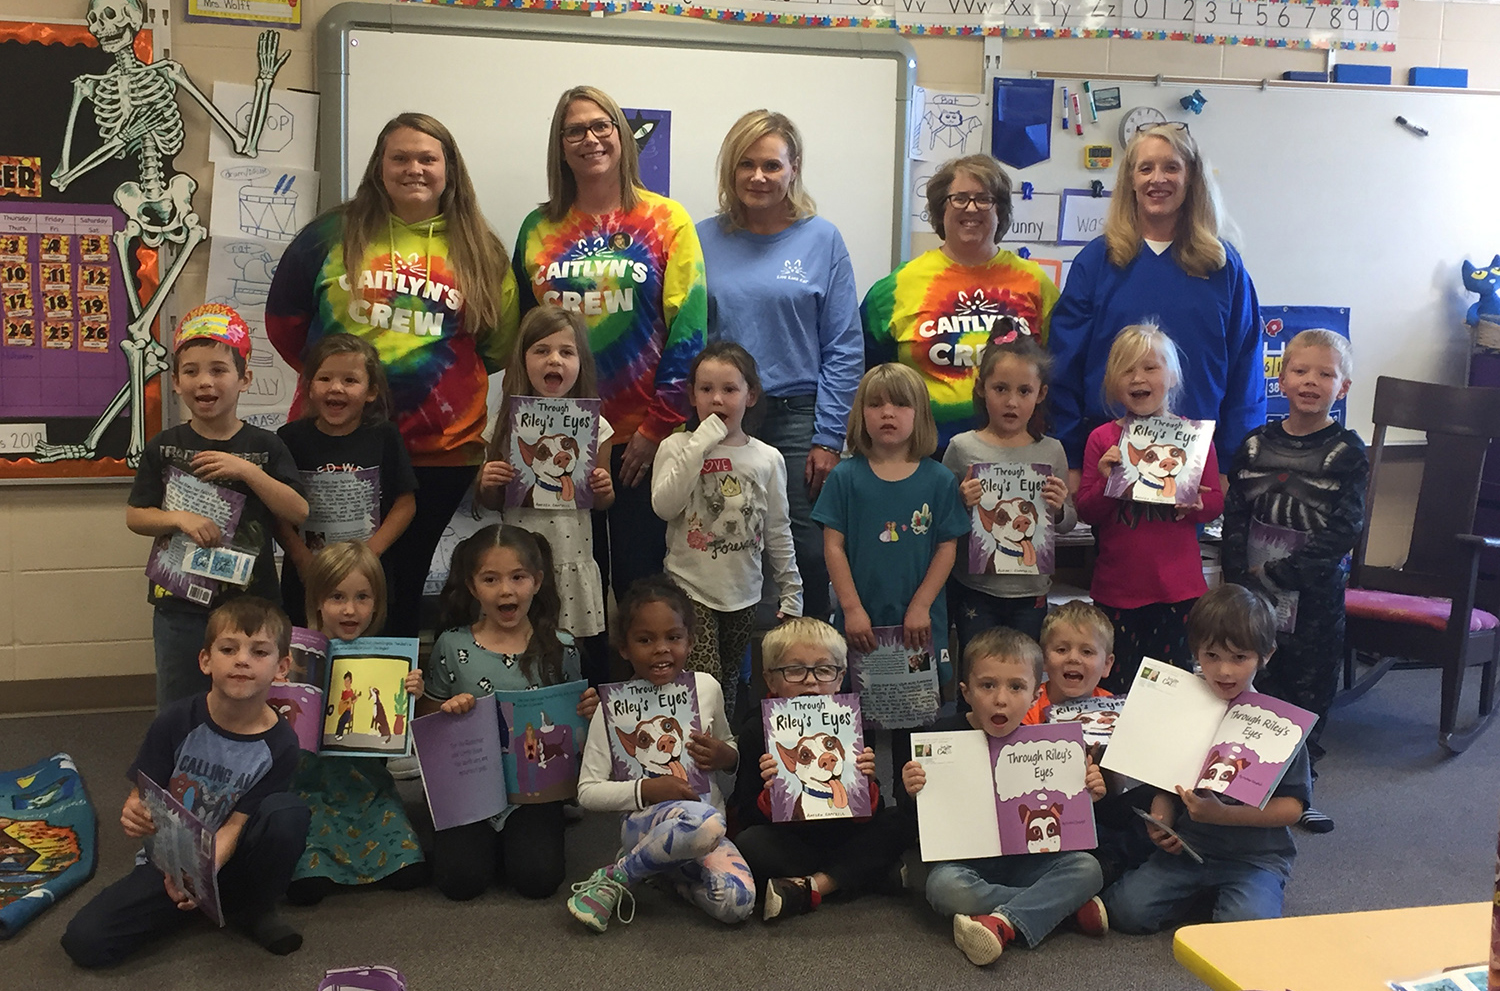 Book giveaway for Mrs. Wolff’s kindergarten class at Baltic Elementary on Oct 25th